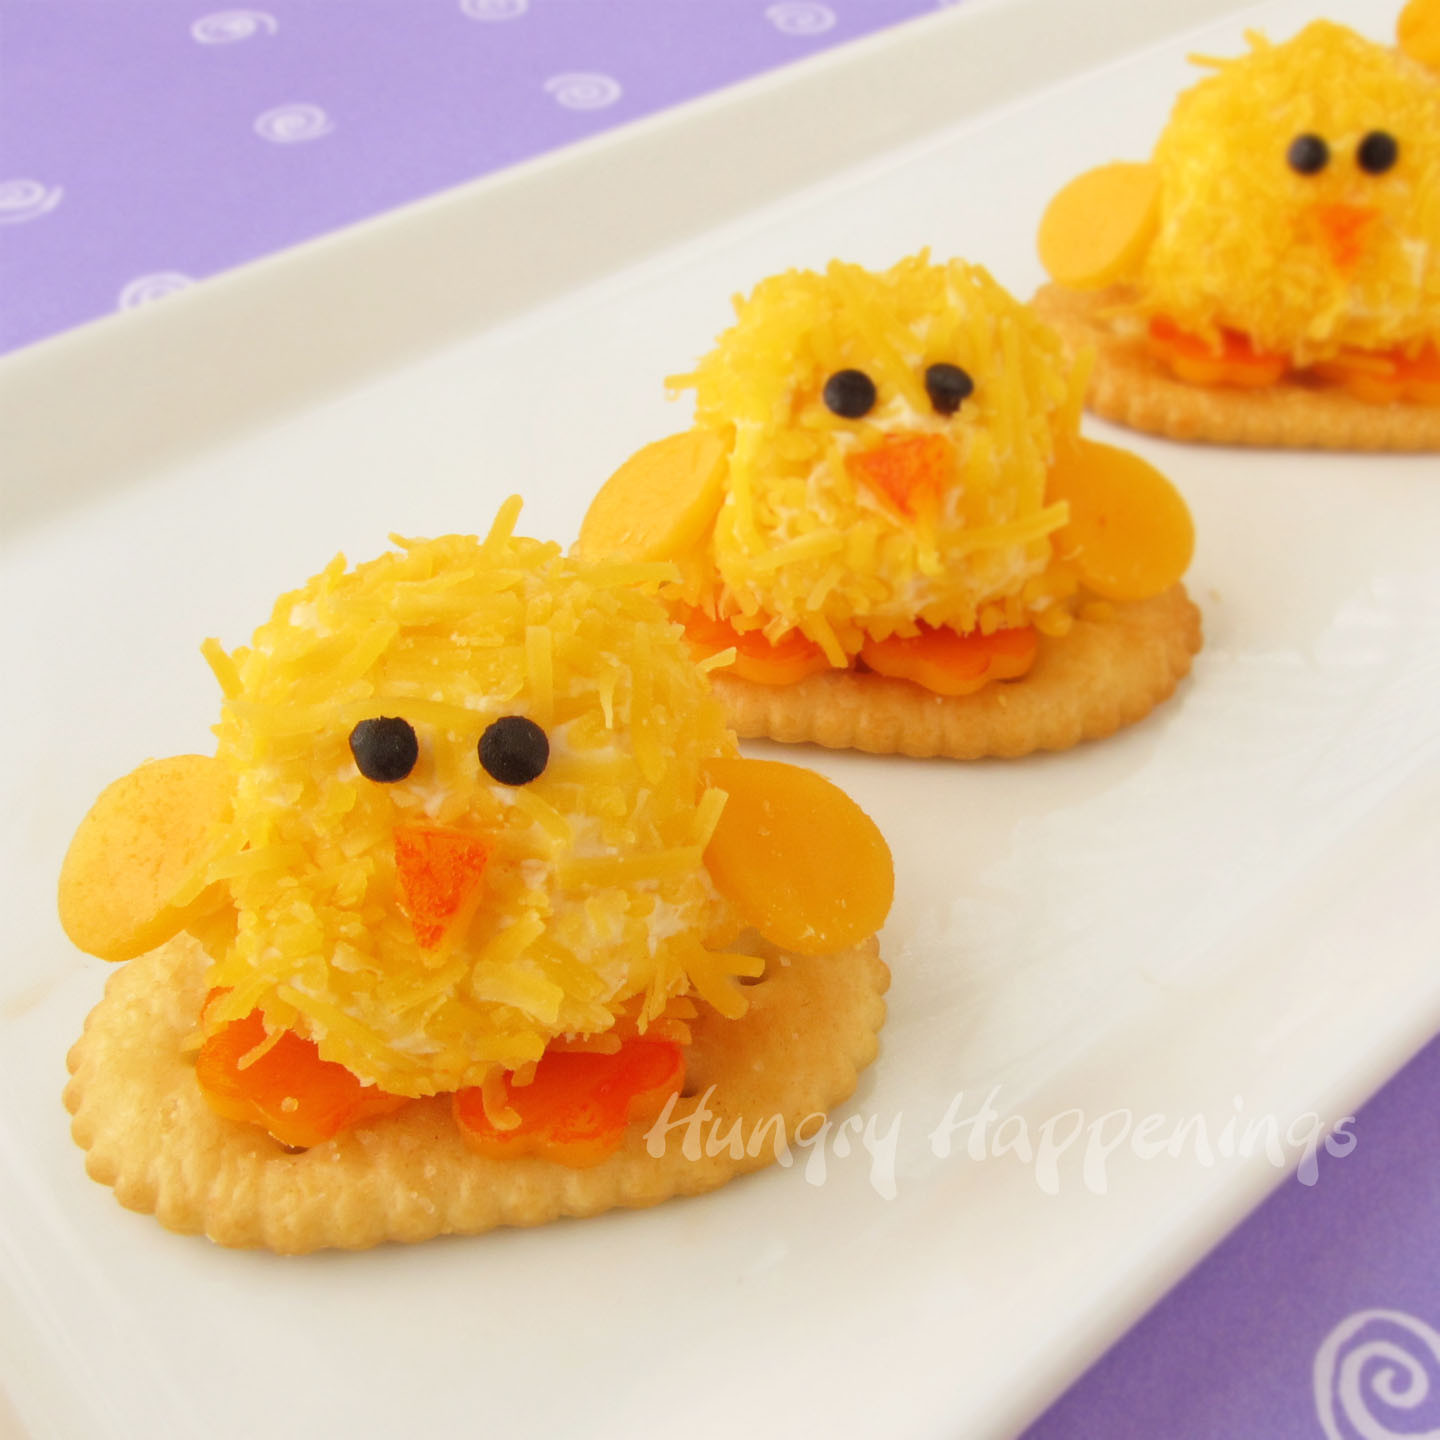 Cute Easter Appetizers 20 Best Ideas Easter Appetizers Baby Chick Cheese Balls are so Cute